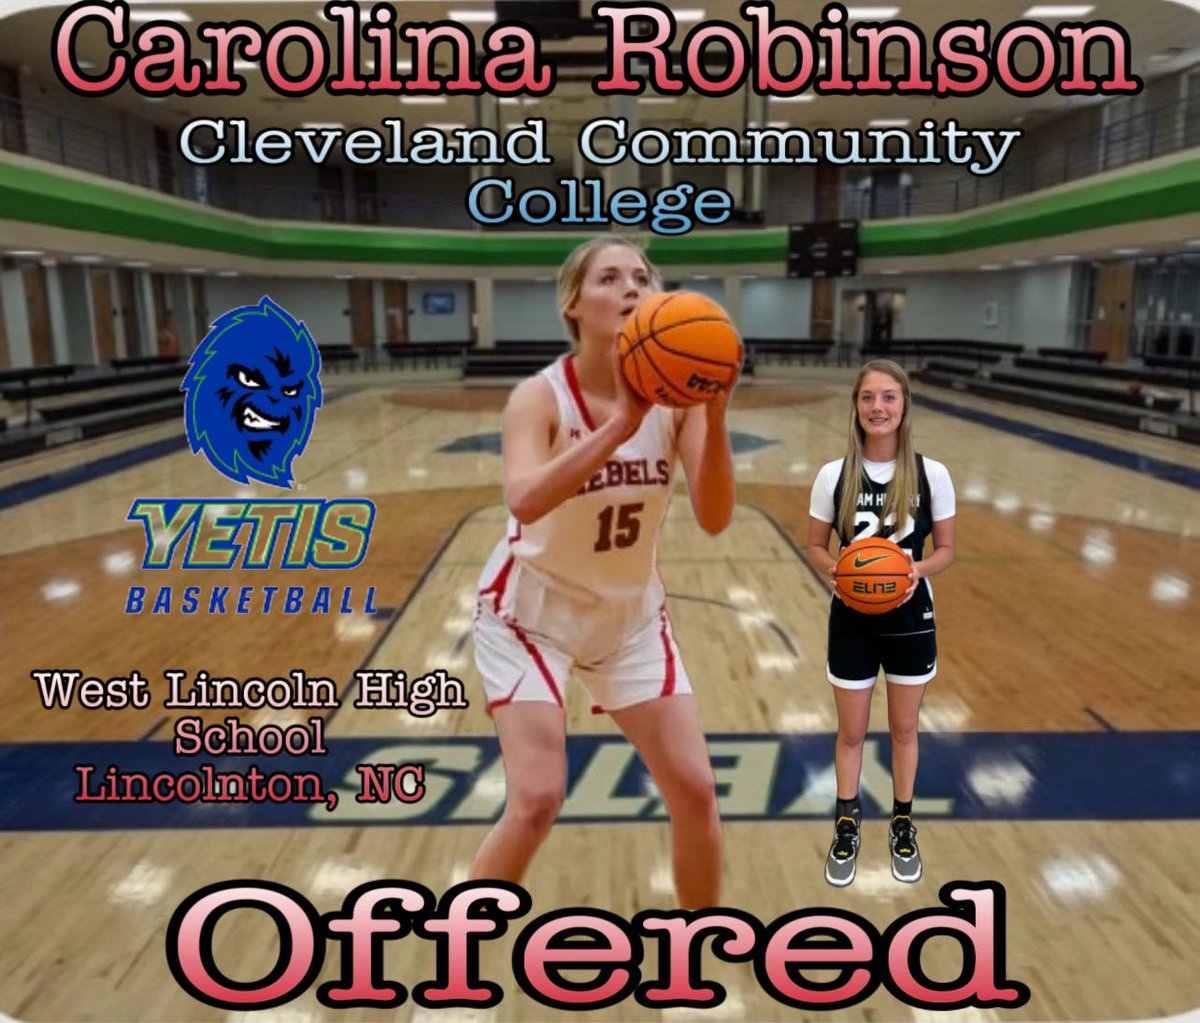 Congratulations to @CarolinaR0626(Carolina Robinson) from West Lincoln High School on her first offer to continue her academic and athletic career at Cleveland Community College.